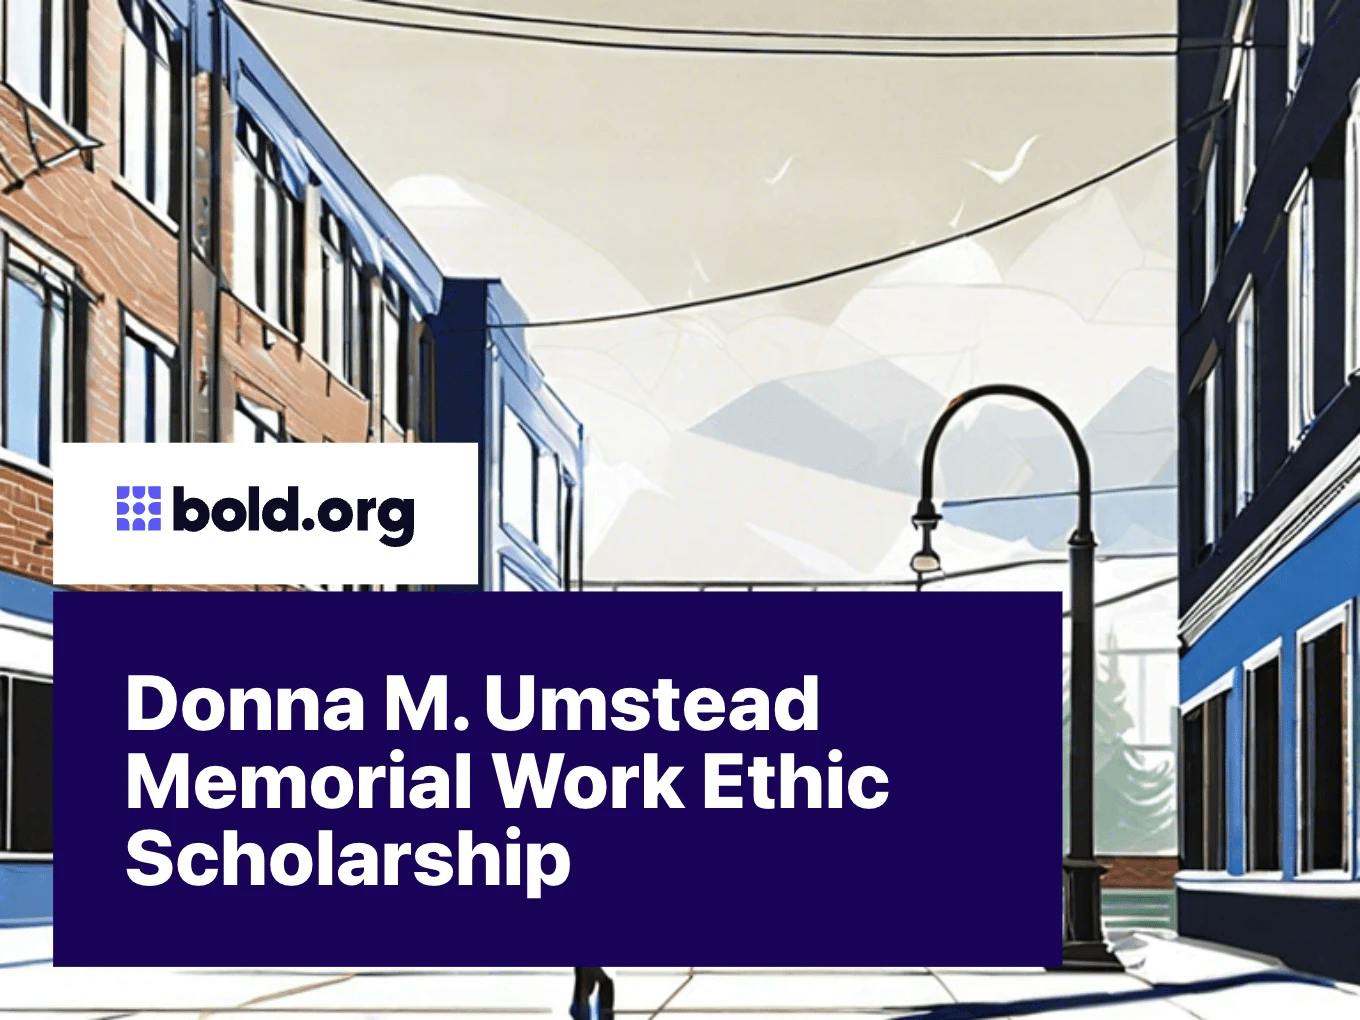 Donna M. Umstead Memorial Work Ethic Scholarship